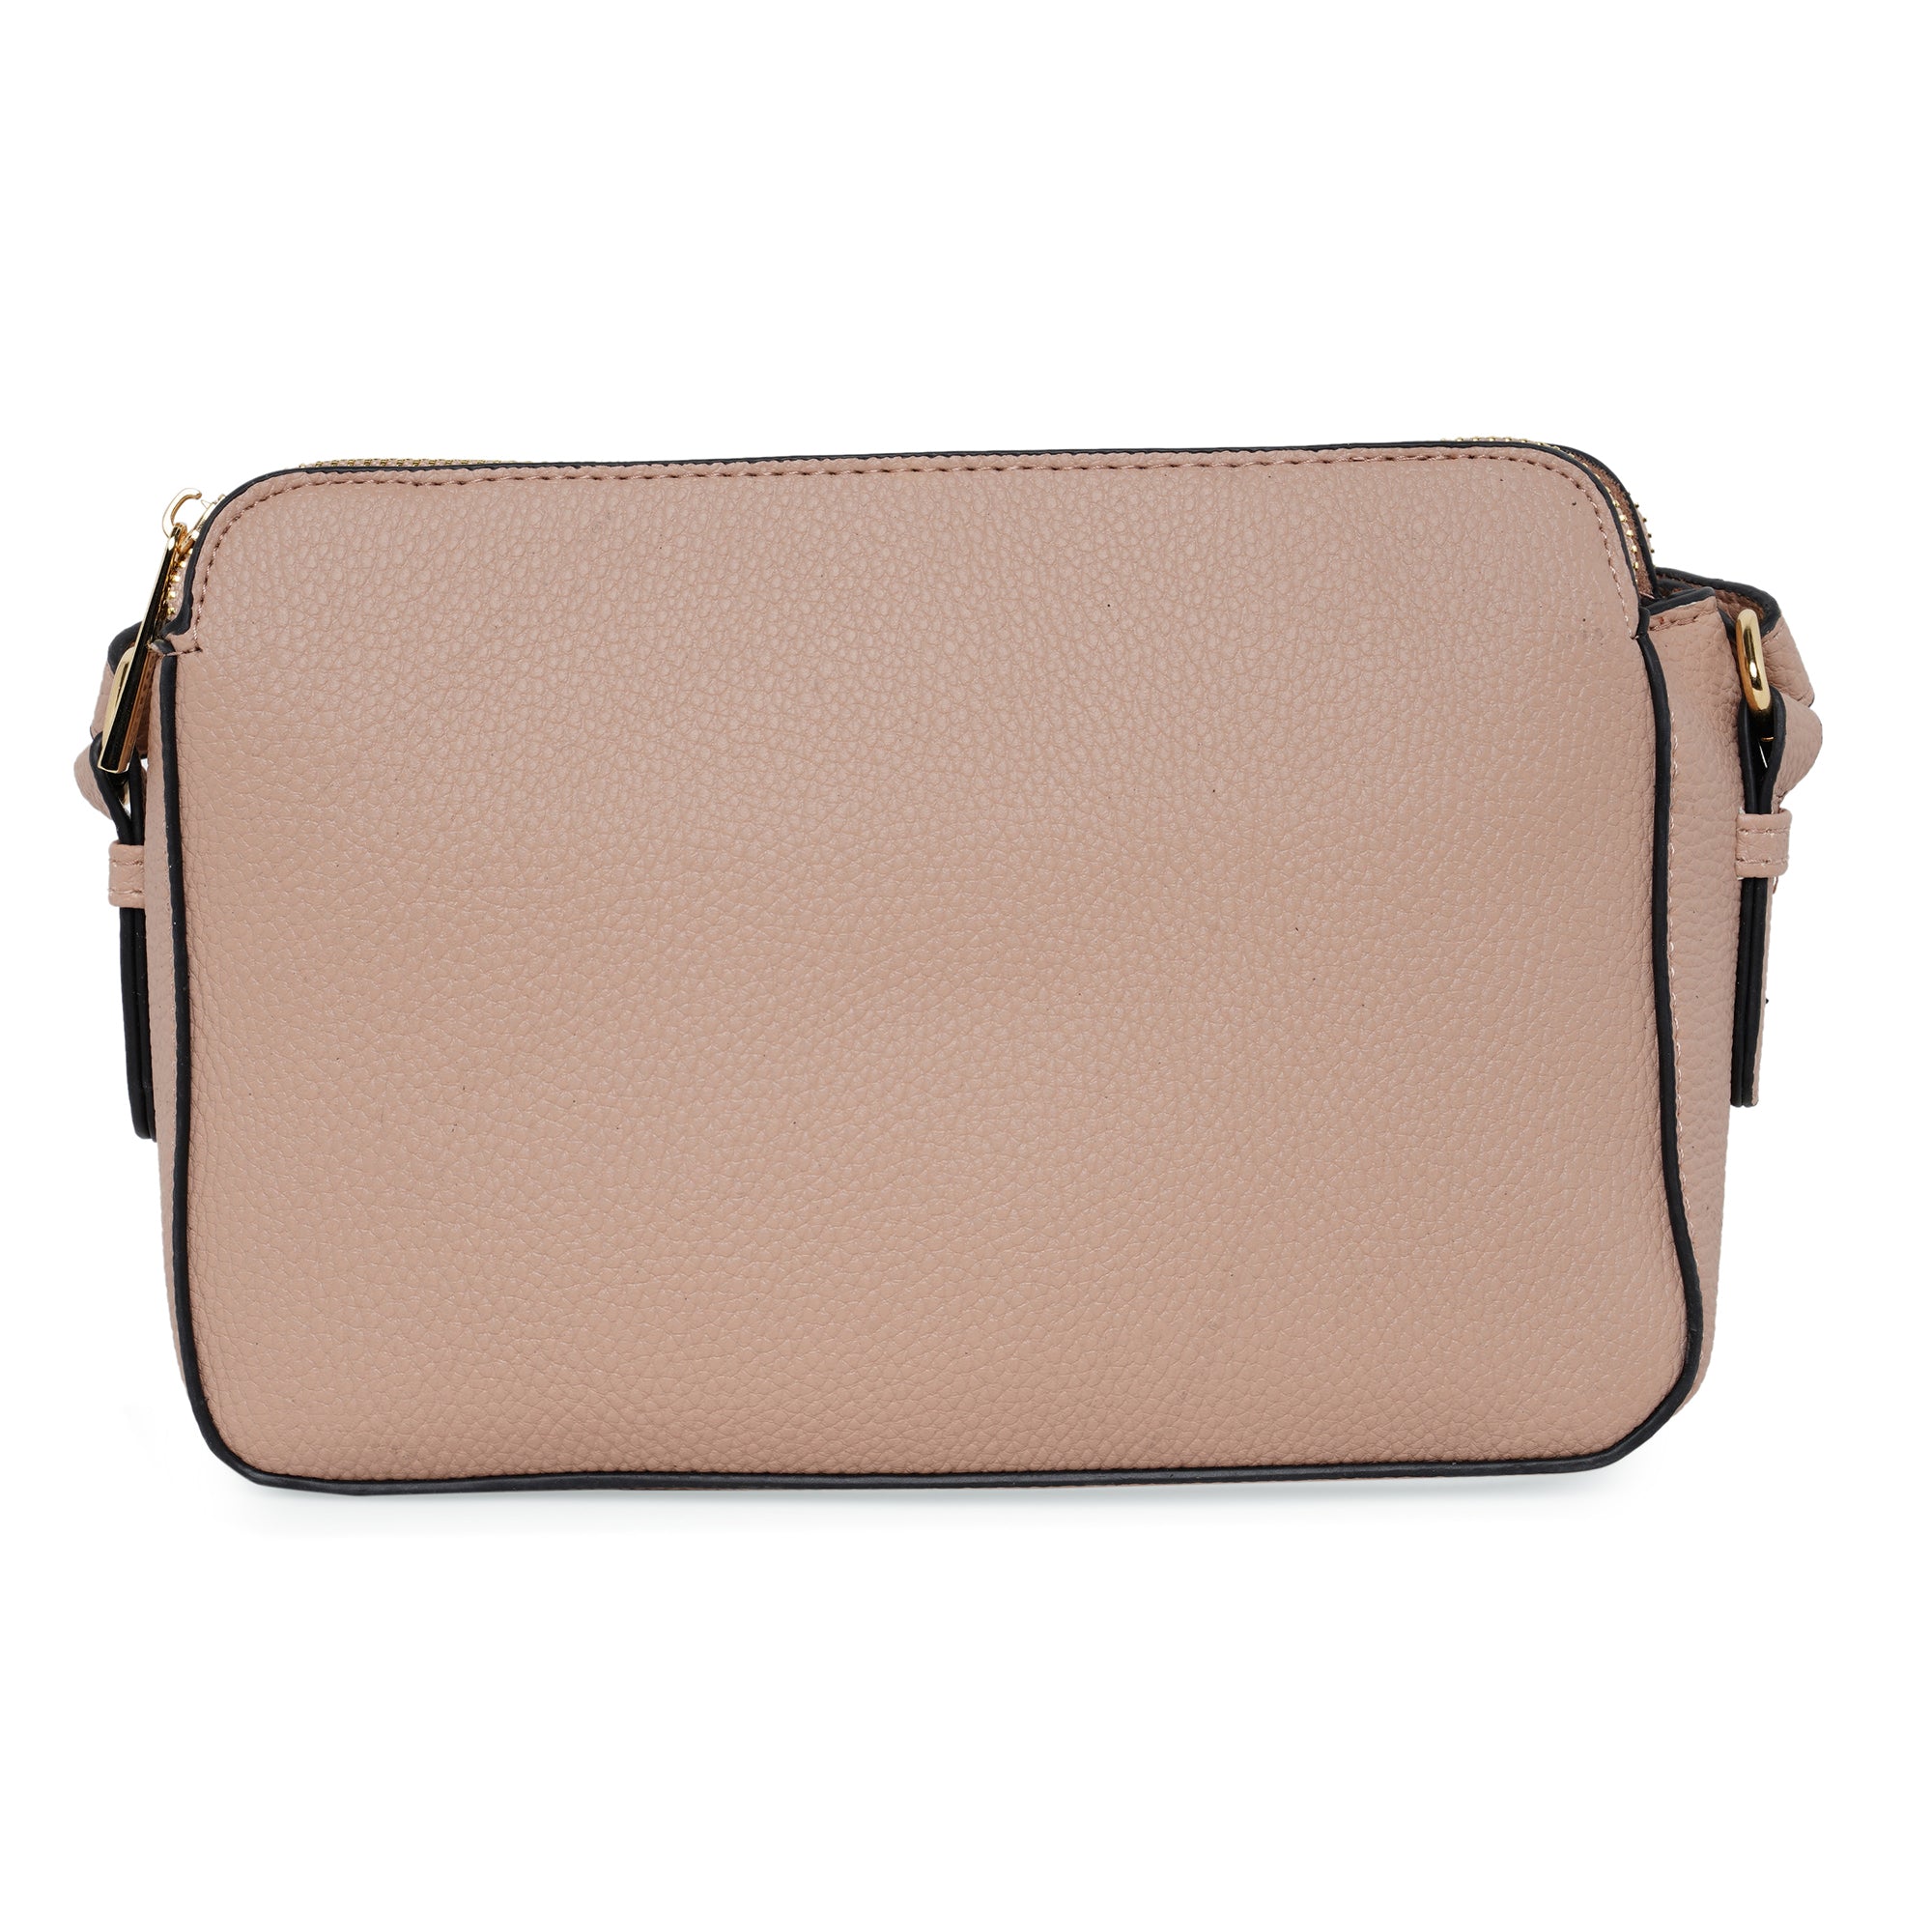 Accessorize London Women's Faux Leather Pink Shelby Sling Bag